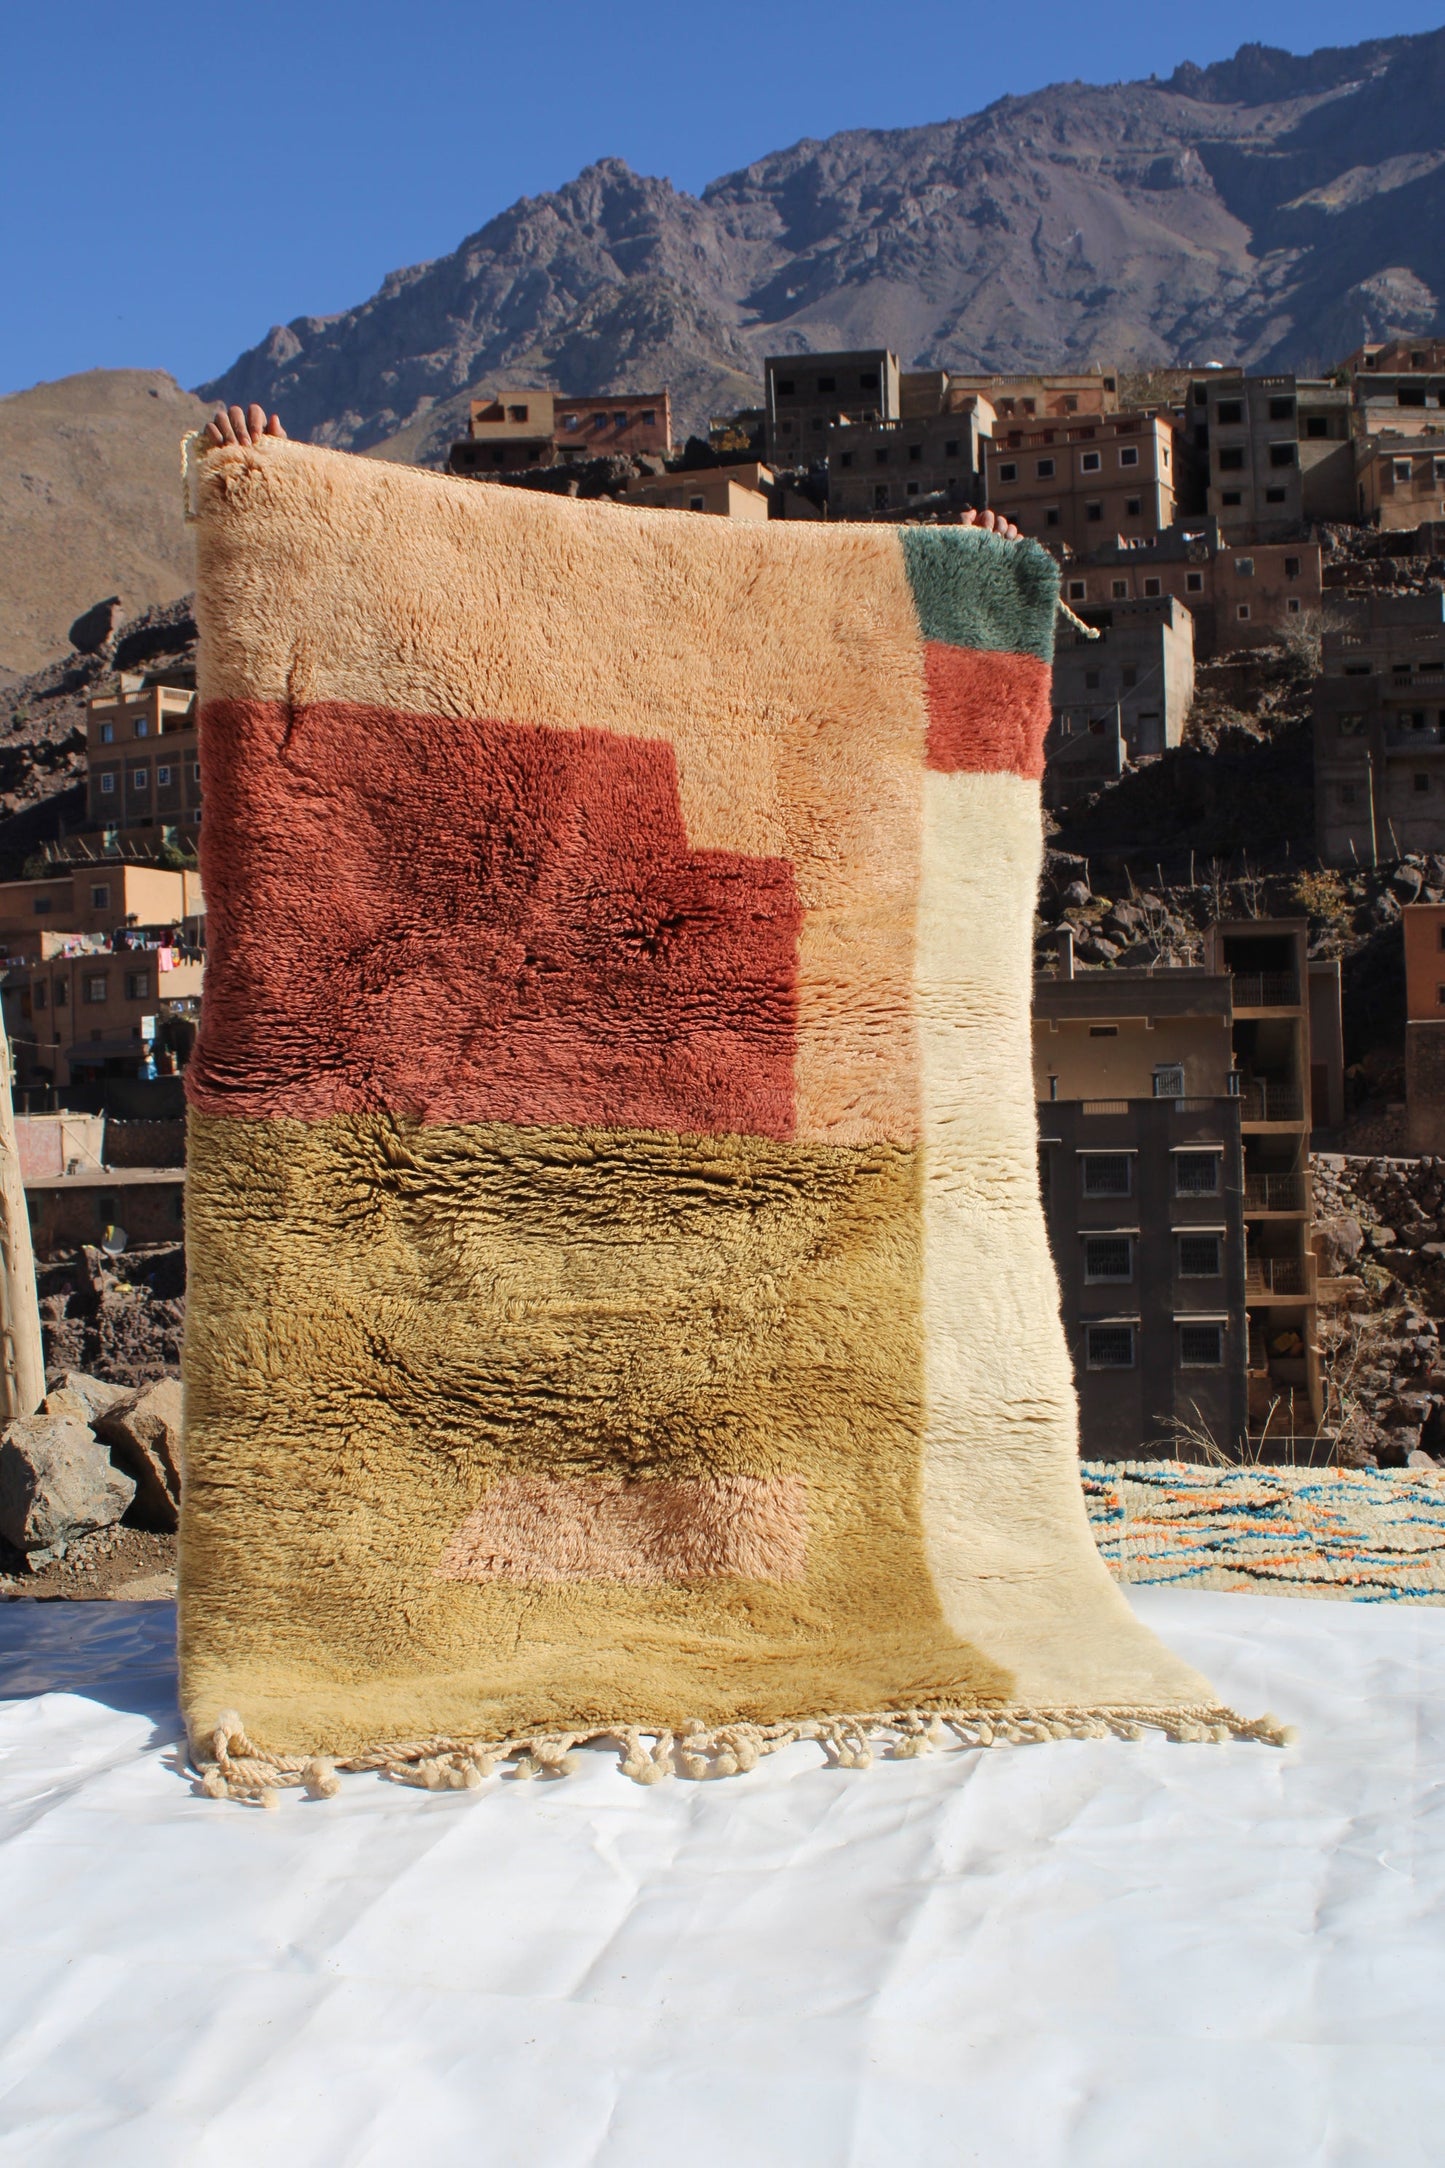 Copy of Beni Ourain rugs originate from the Atlas Mountains of Morocco and are characterized by their distinctive, neutral-toned, and geometric designs. These handwoven rugs often feature a plush pile and are made by the Berber tribes,  size is 190x120cm